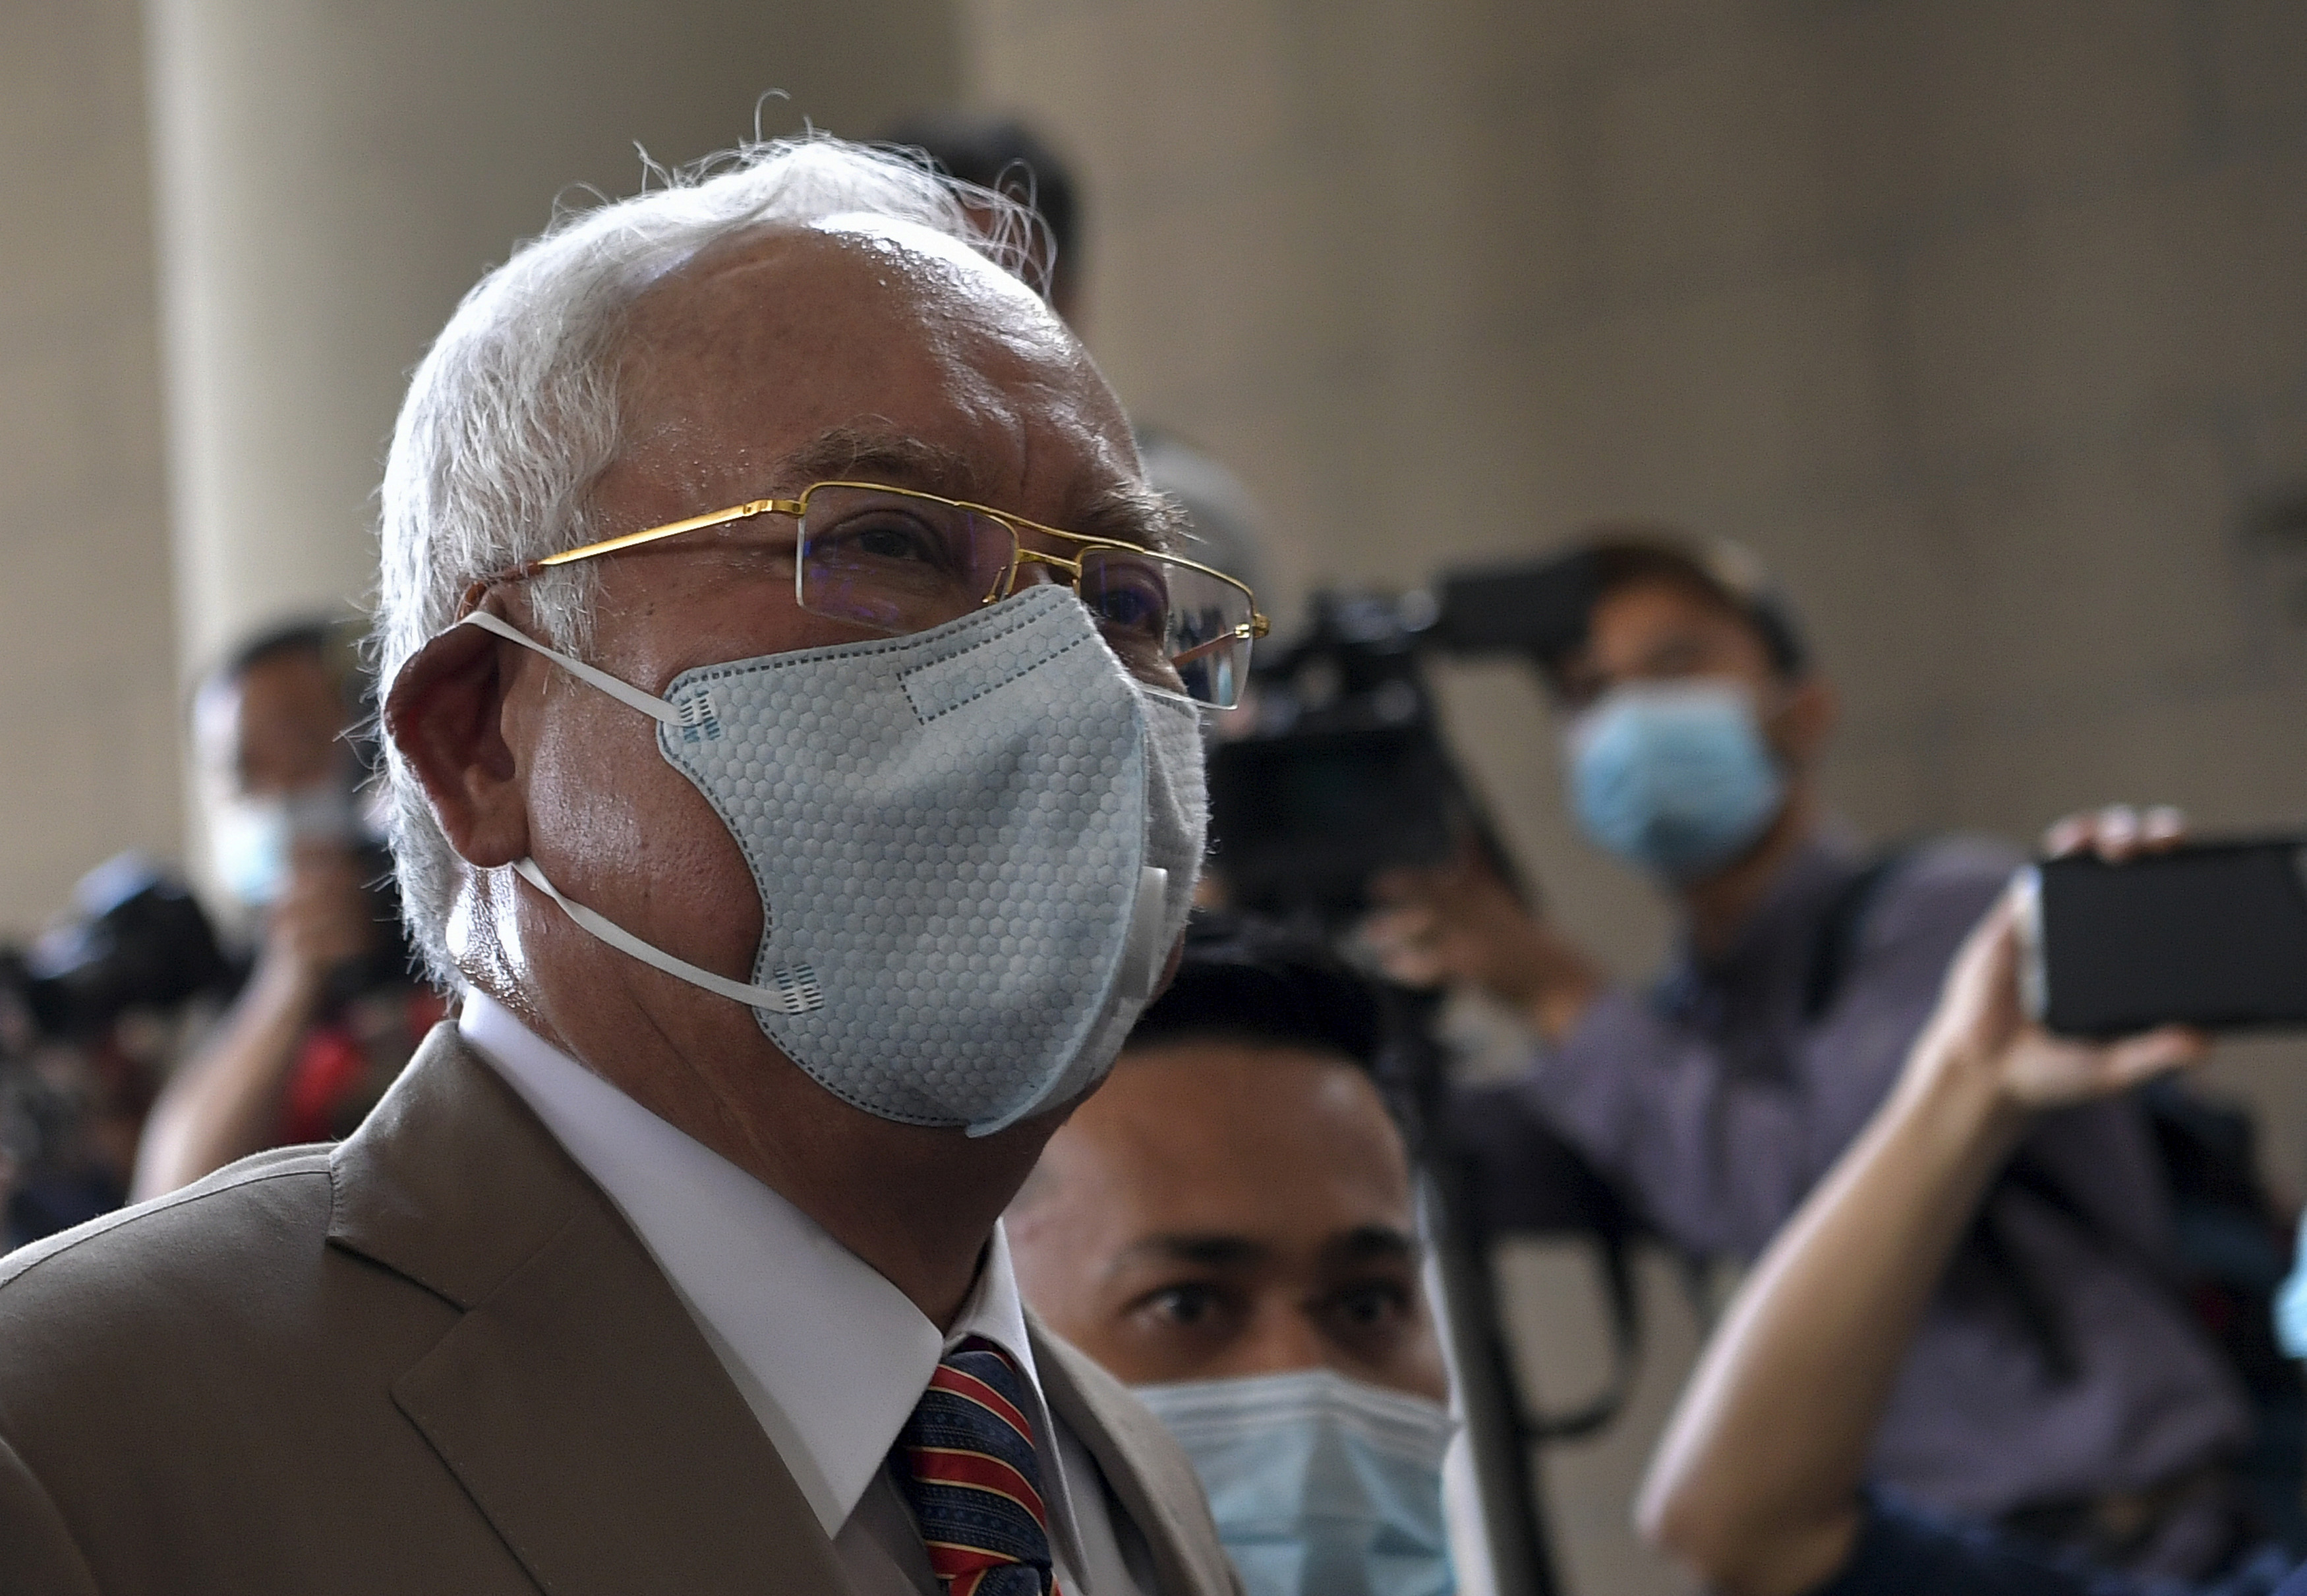 Update 2: Former Malaysian PM found guilty in SRC case, sentenced to 12 years jail, fined RM210 mln